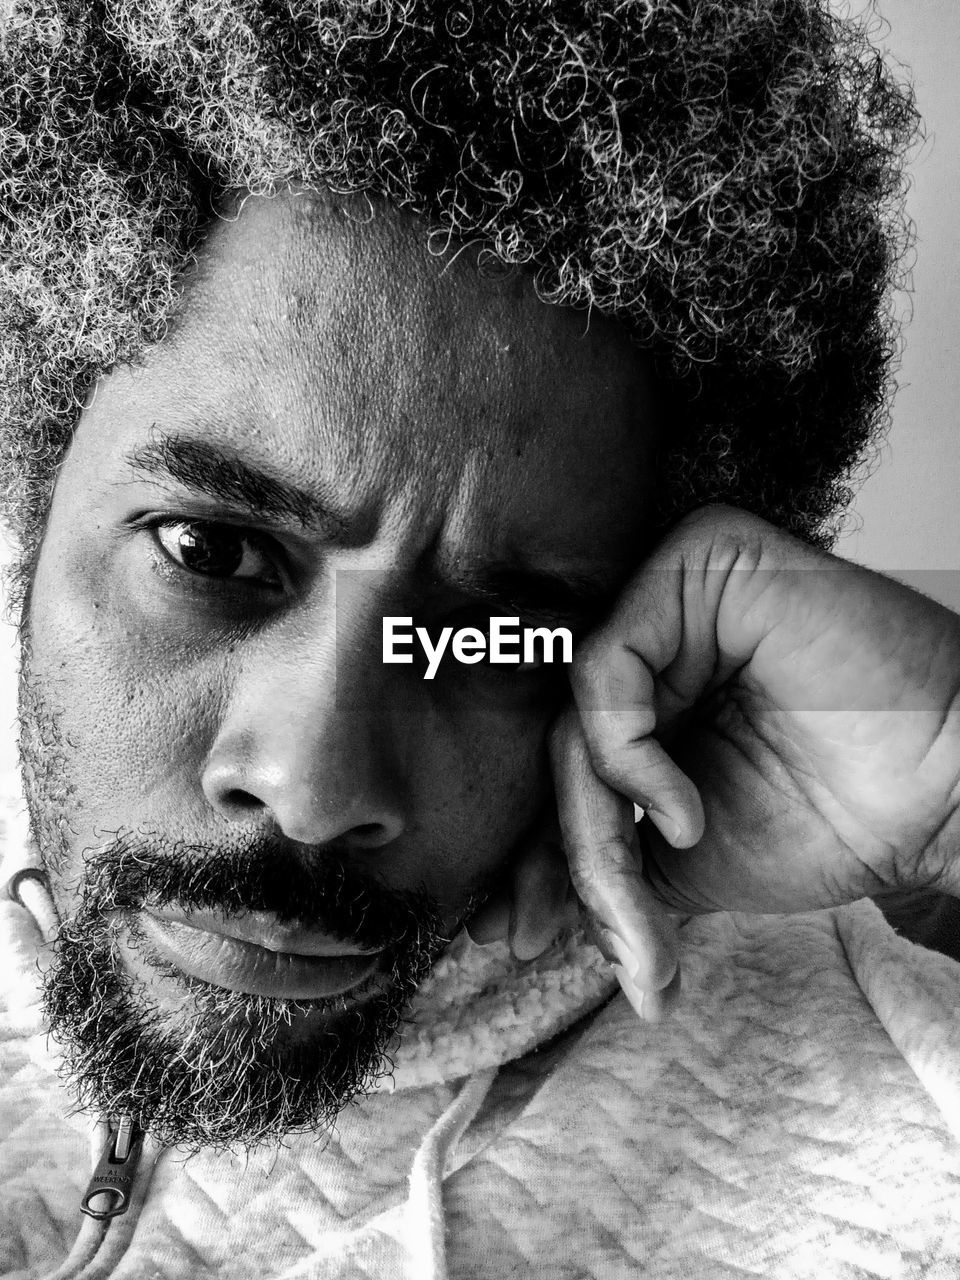 portrait, one person, adult, black and white, headshot, human hair, looking at camera, men, beard, monochrome photography, facial hair, monochrome, hairstyle, close-up, young adult, human face, lifestyles, indoors, front view, person, afro, serious, black, leisure activity, human head